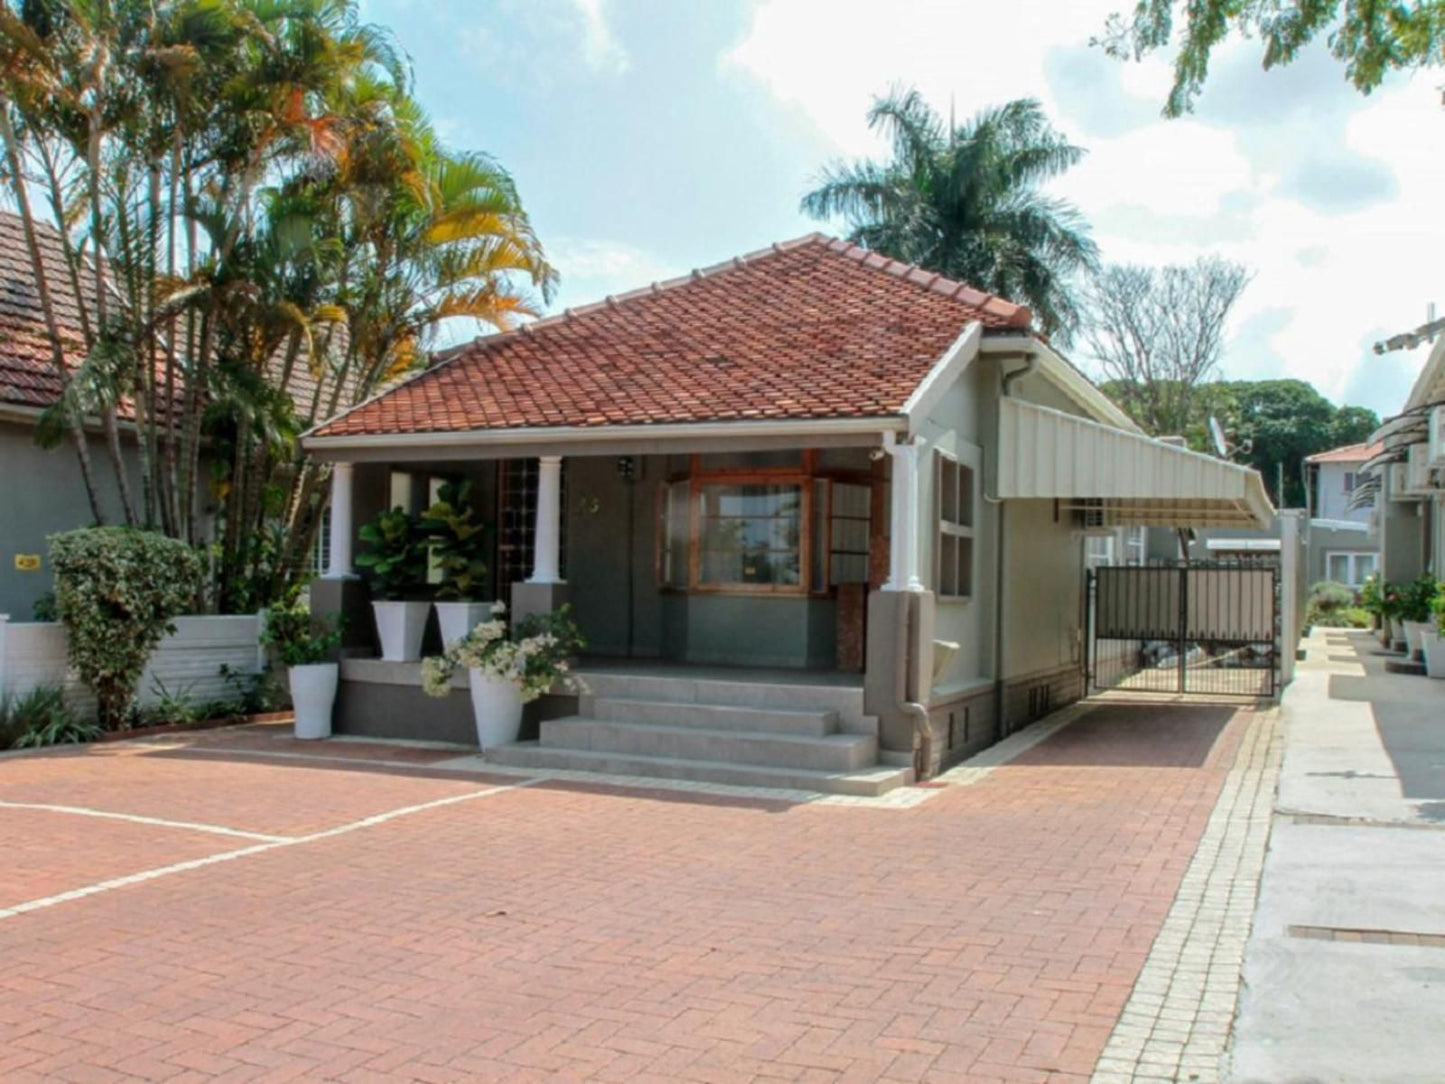 Beechwood Guesthouse Bulwer Durban Durban Kwazulu Natal South Africa House, Building, Architecture, Palm Tree, Plant, Nature, Wood